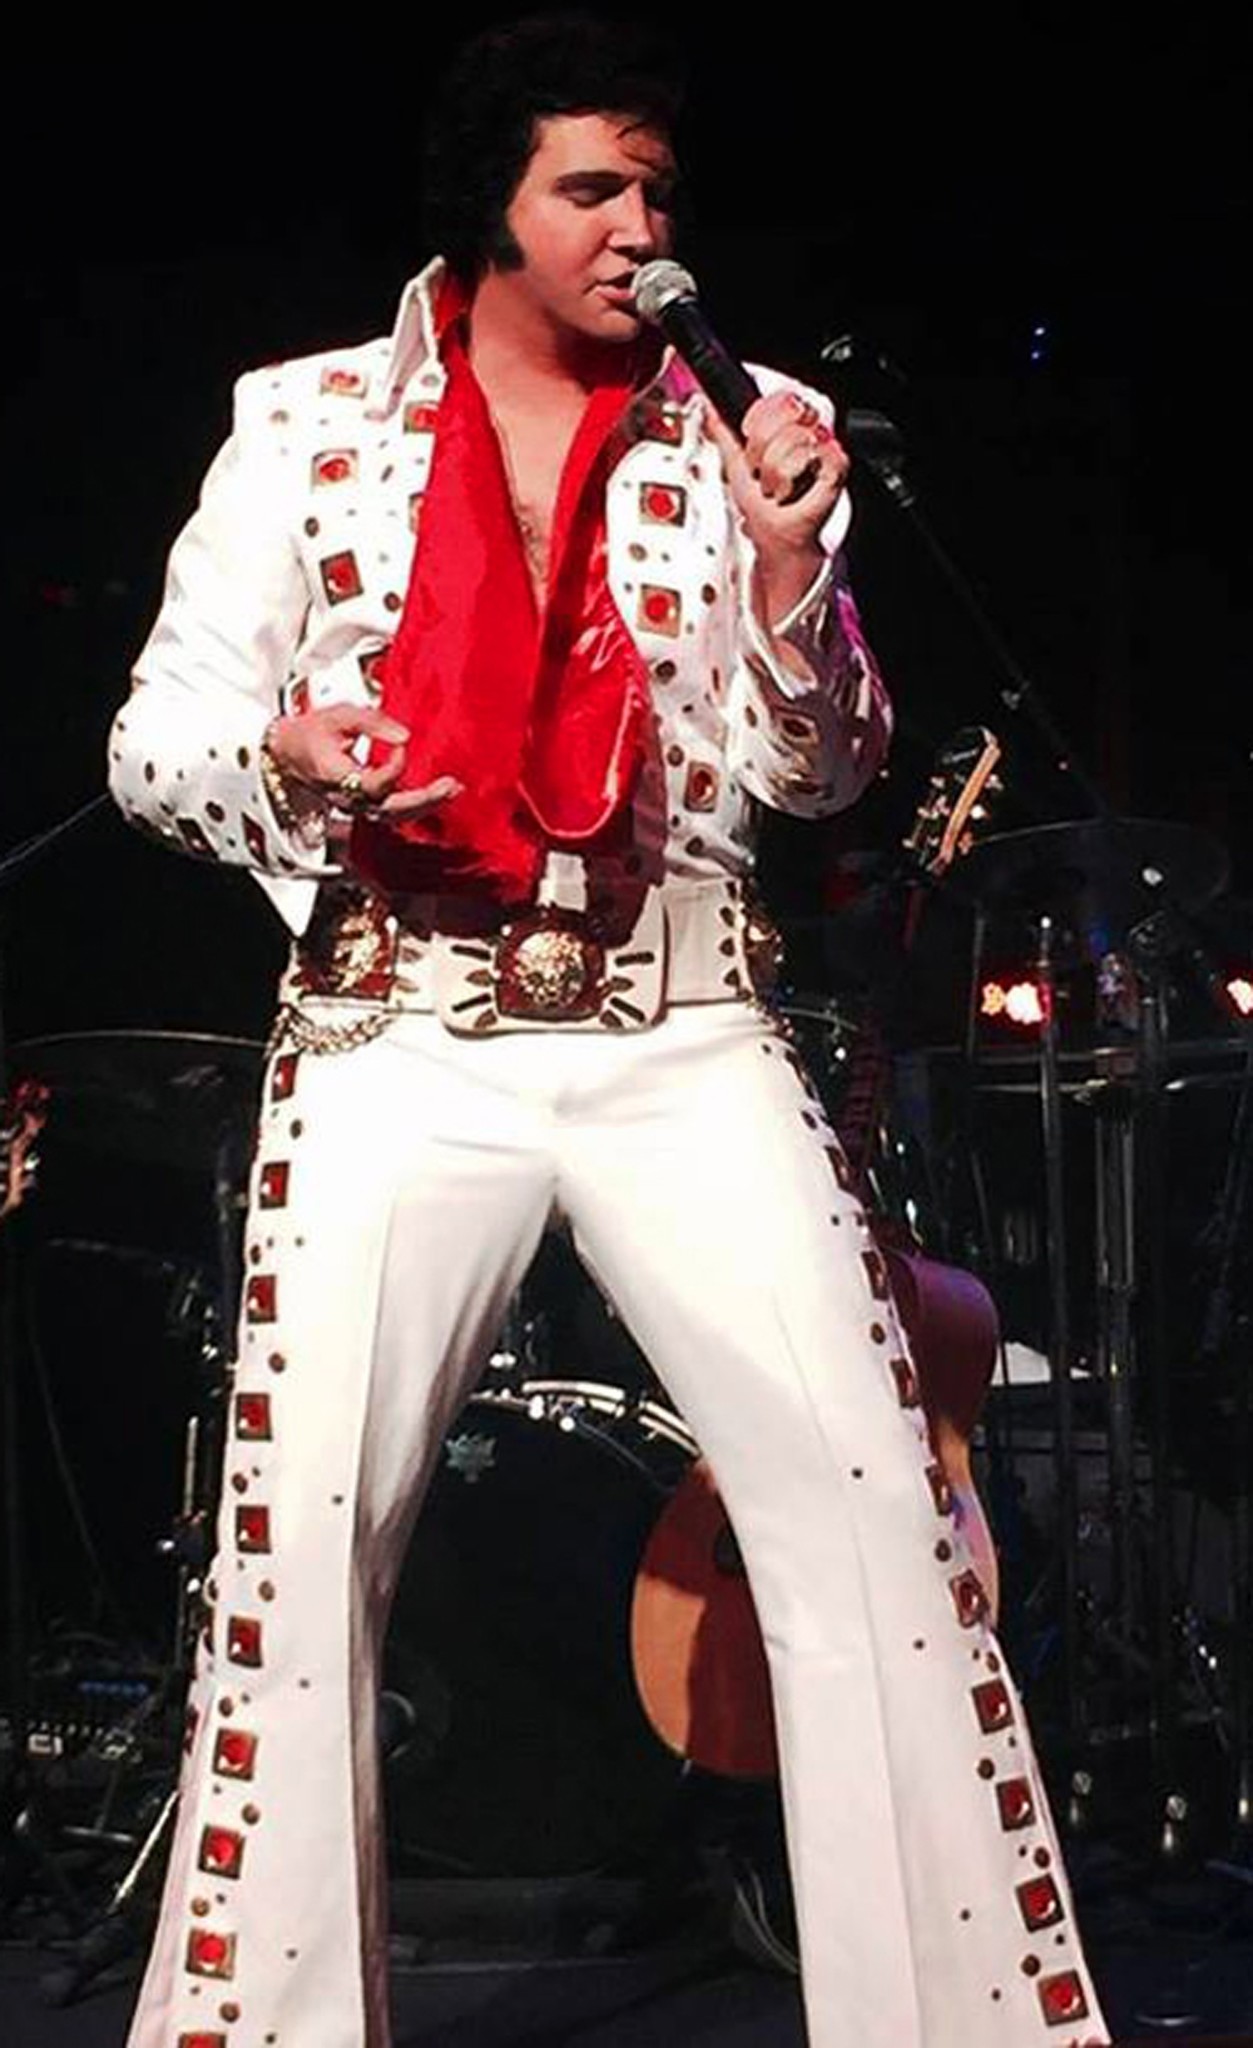 Donny Edwards, an Elvis tribute artist who has performed at Graceland, this week will sing at the Westgate.